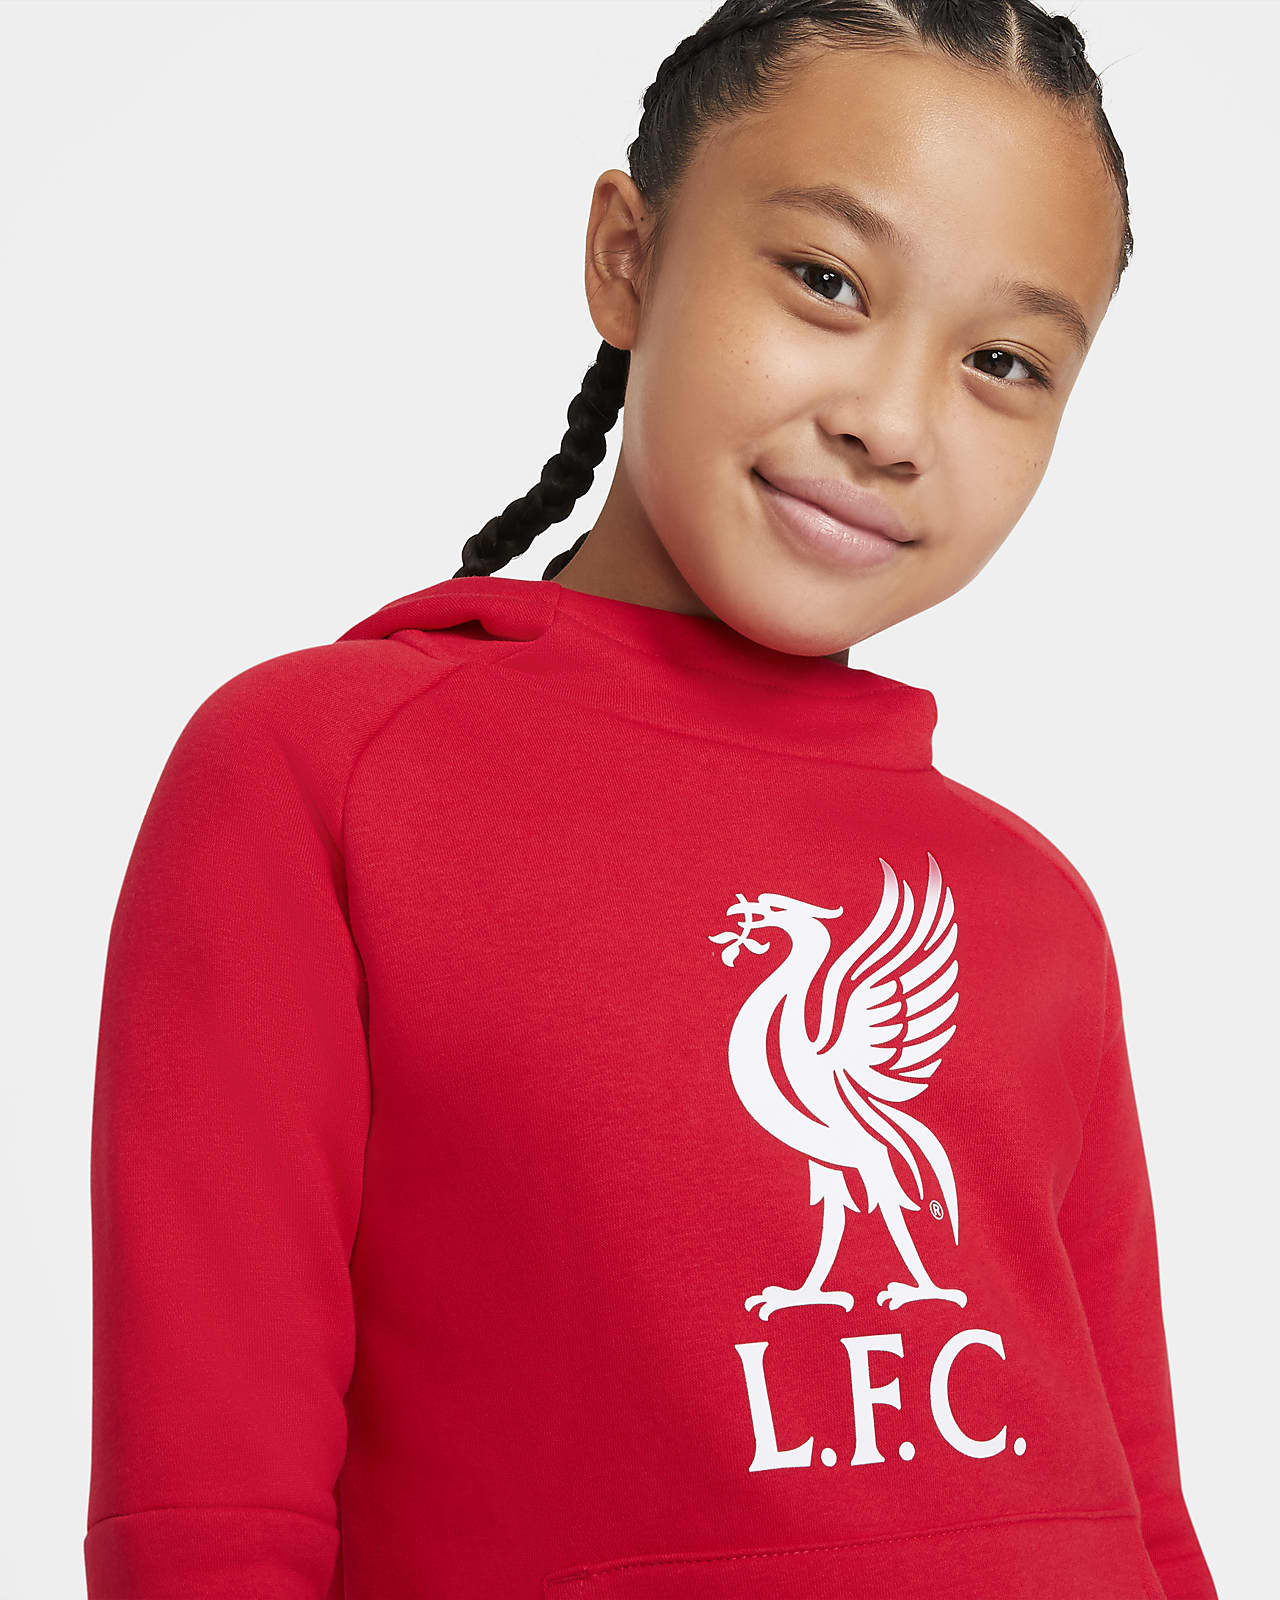 Liverpool Nike Kit - Liverpool Fans Love These Nike Concept Kits ...